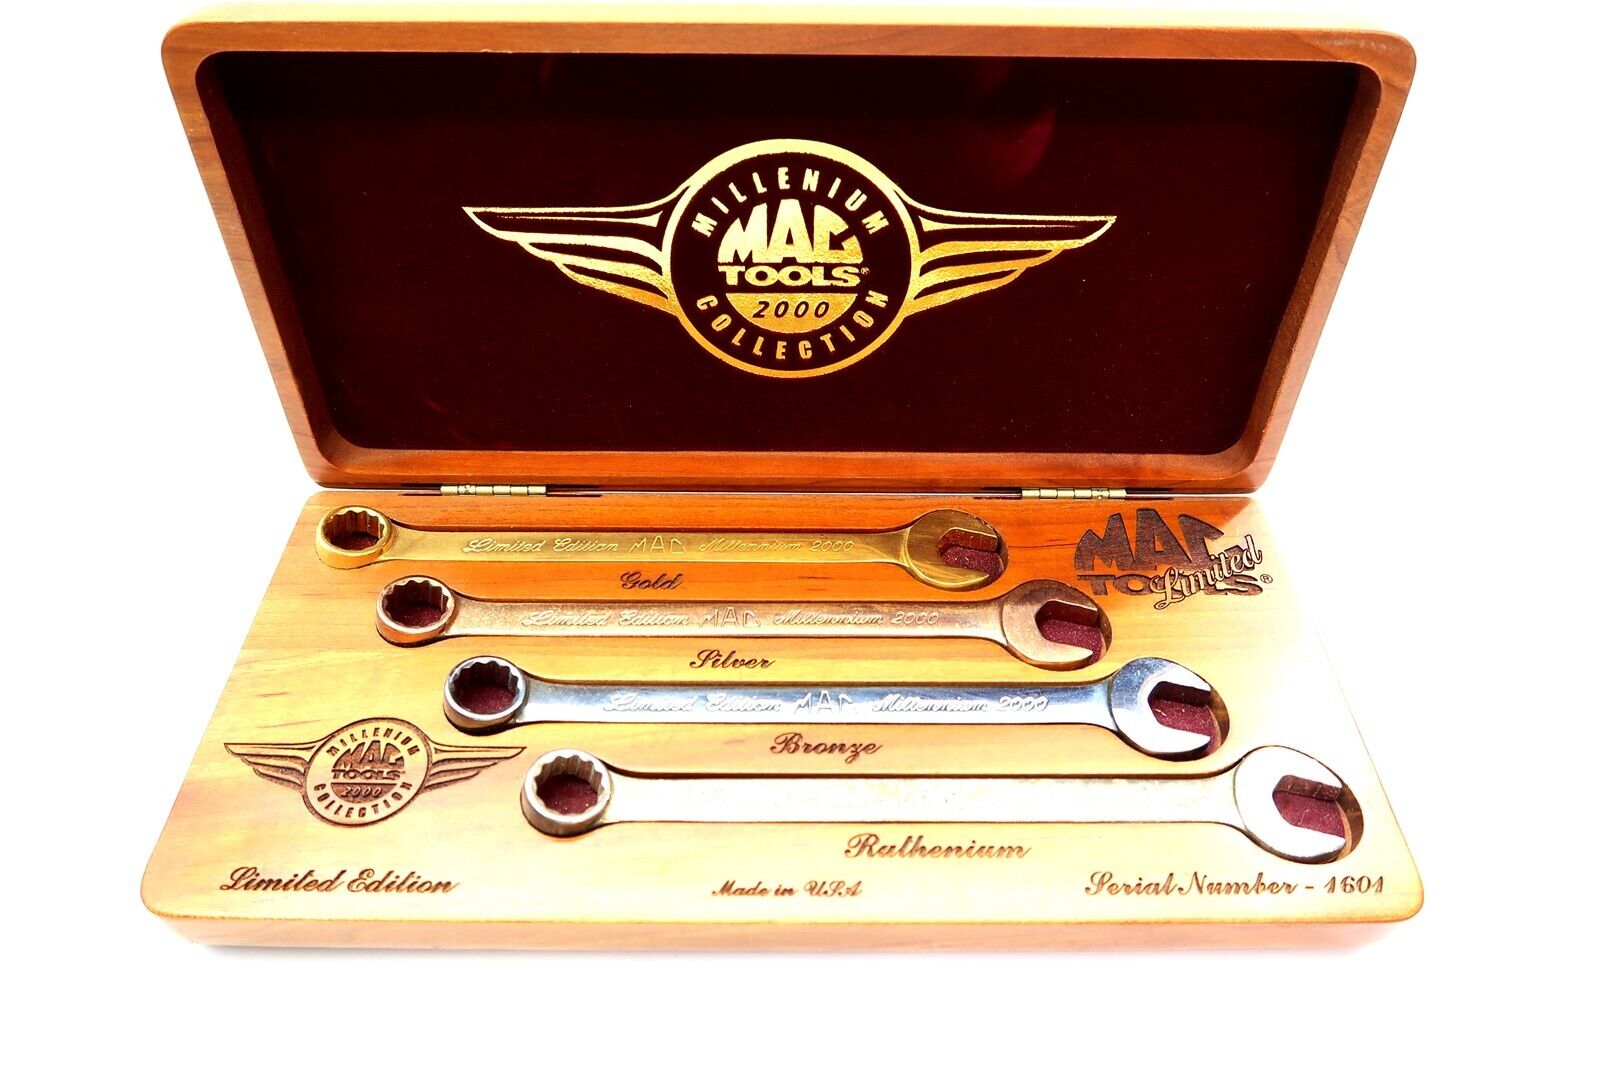 MAC TOOLS 2000 Millenium Collection Wrenches in Gold, Silver, Bronze & Ruthenium